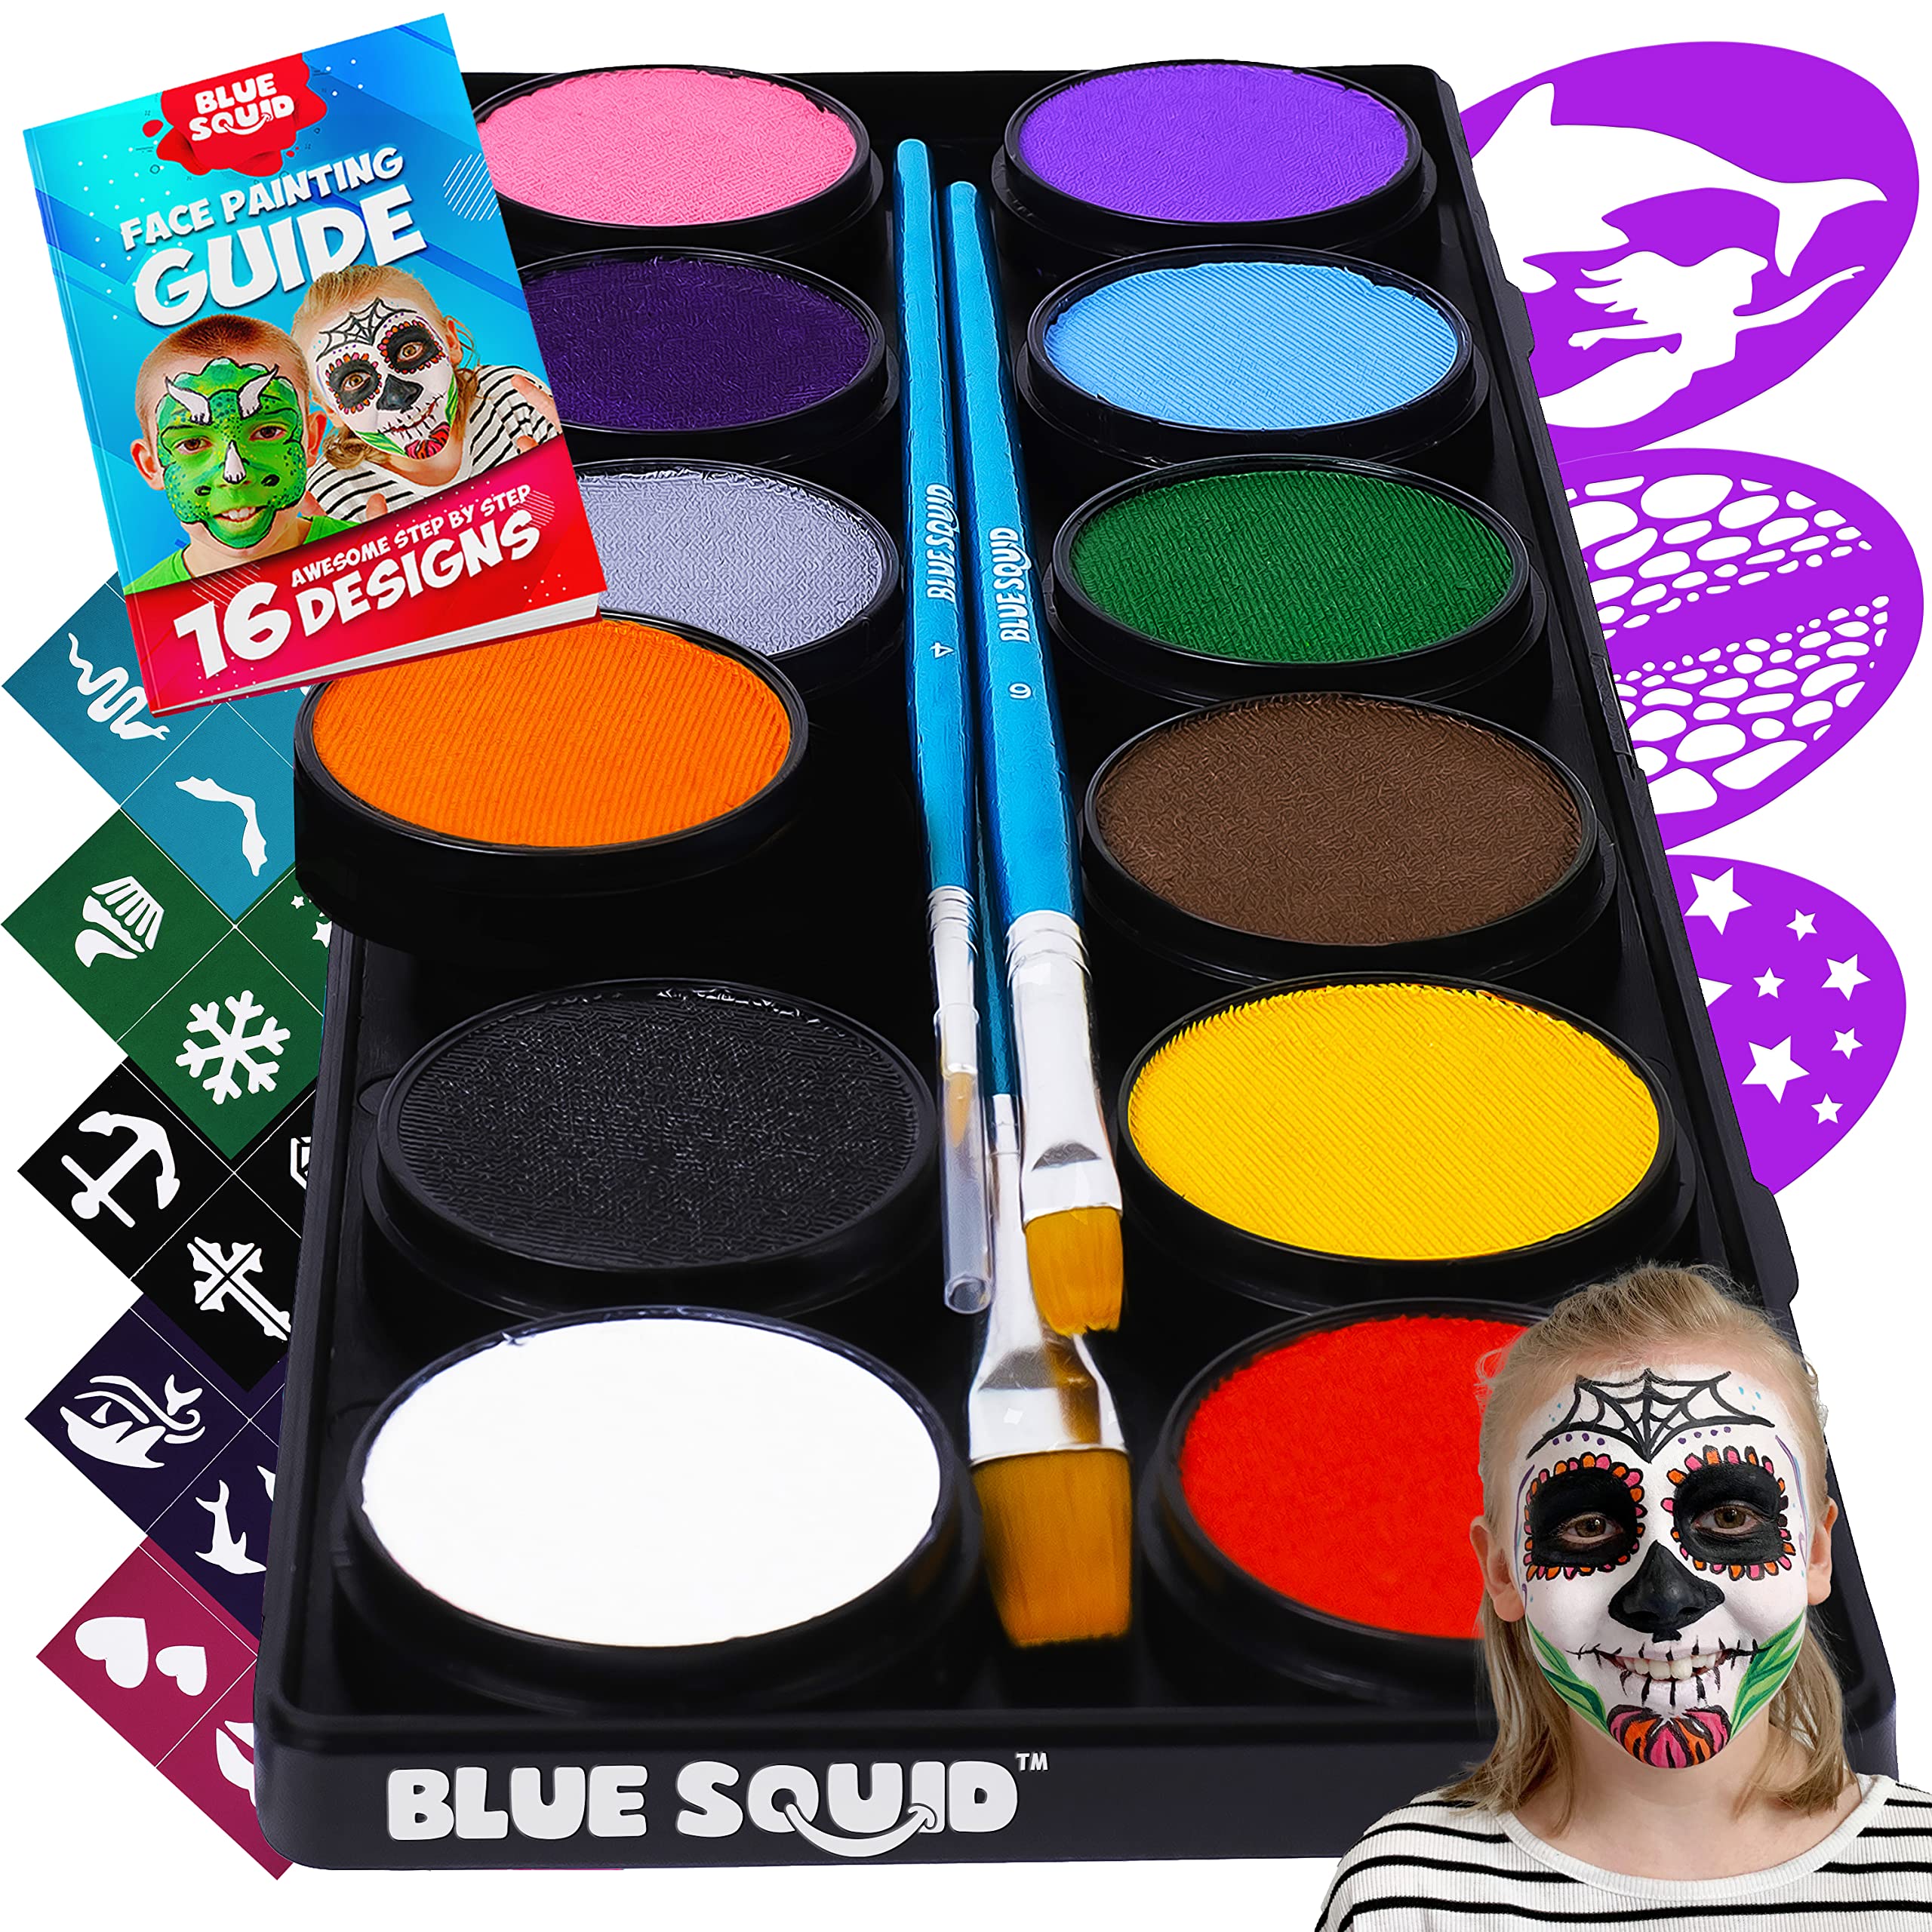  Face Painting Kit for Kids Party with 12 Amazing Colors,  Stencils & Makeup Brush : Arts, Crafts & Sewing